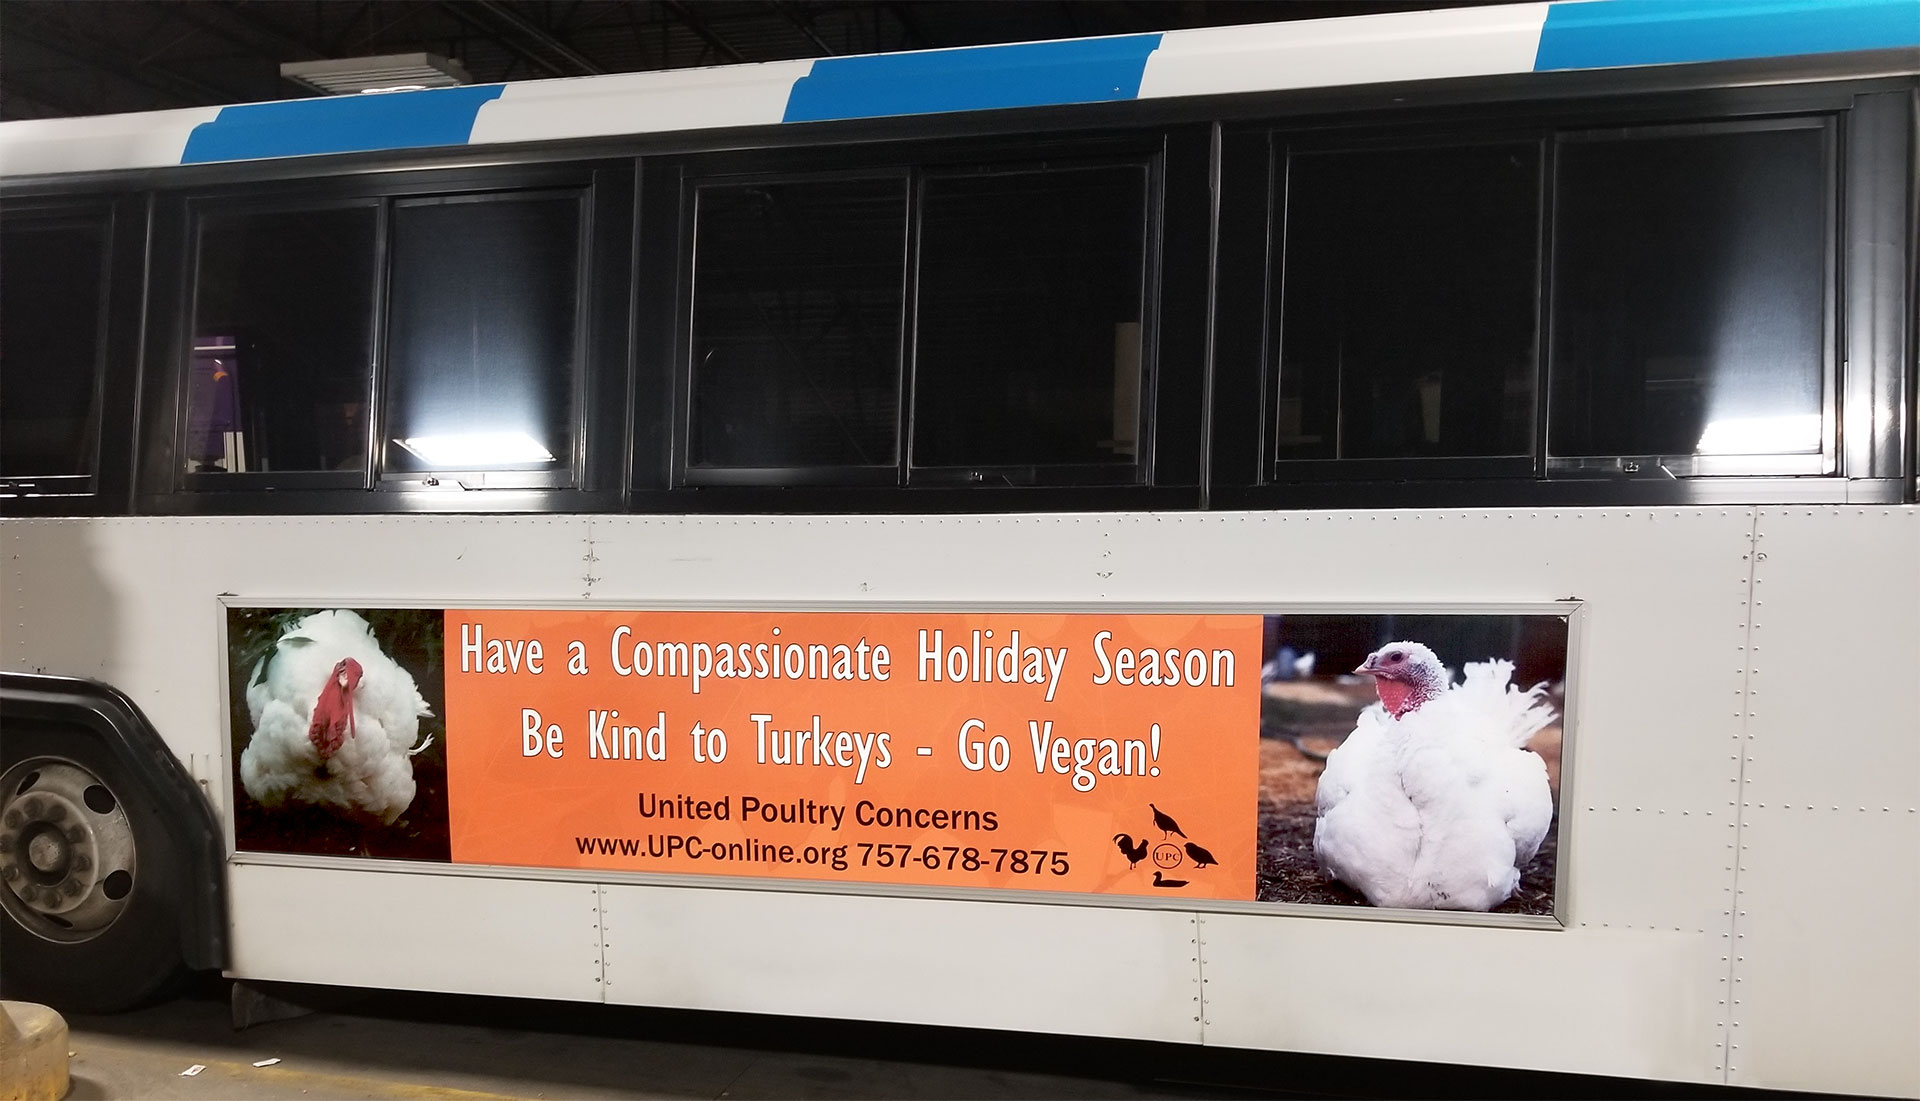 Have a compassionate holiday sign on a bus